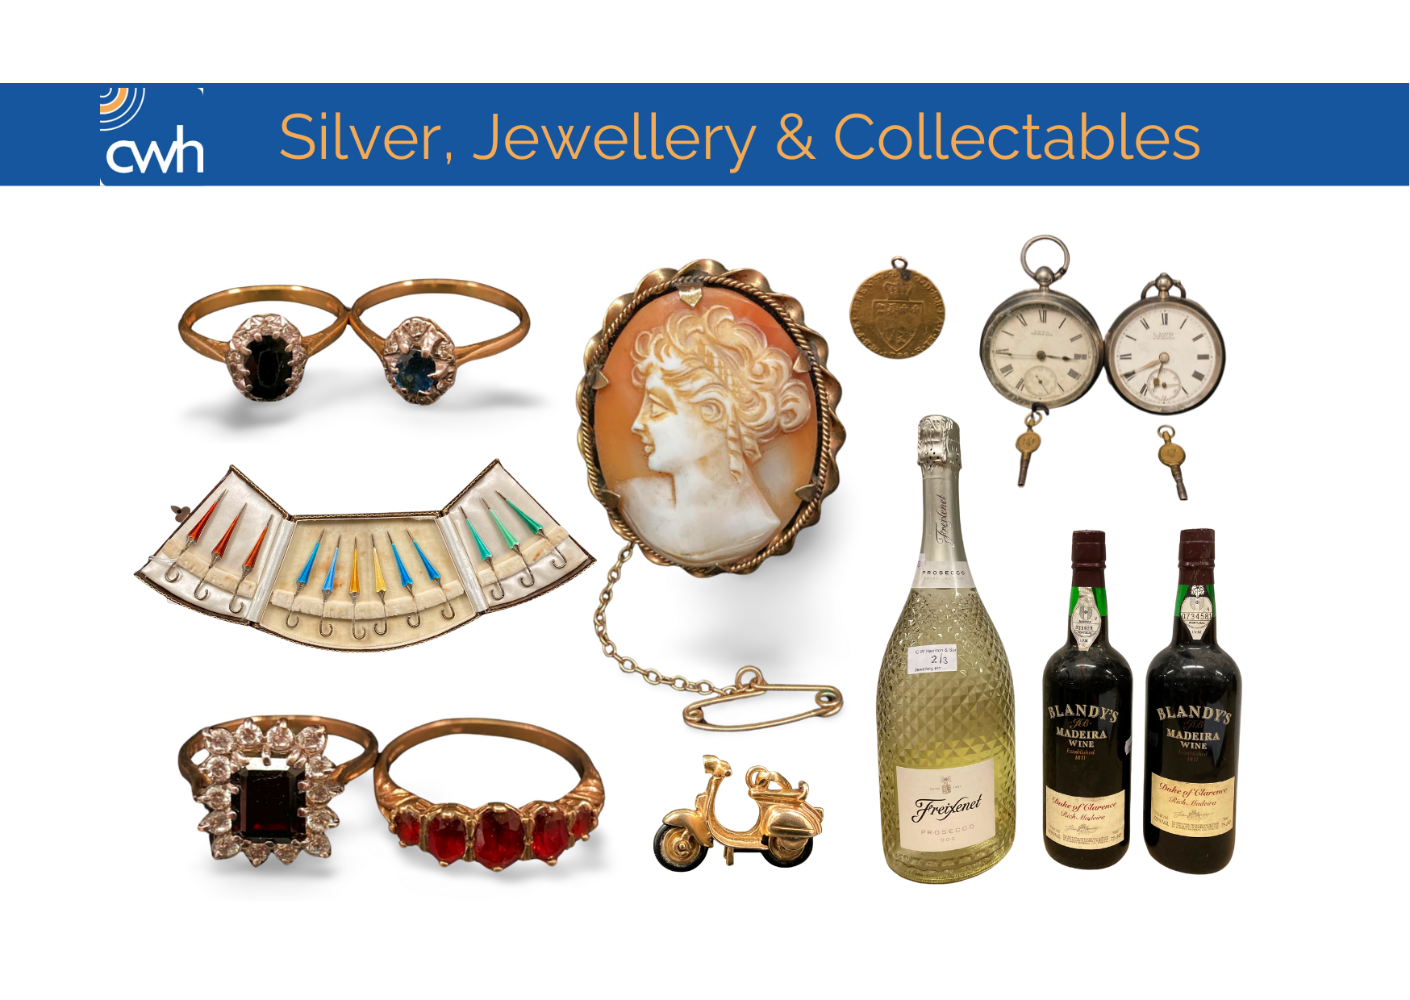 Silver, Jewellery, Collectables and Wet Stock